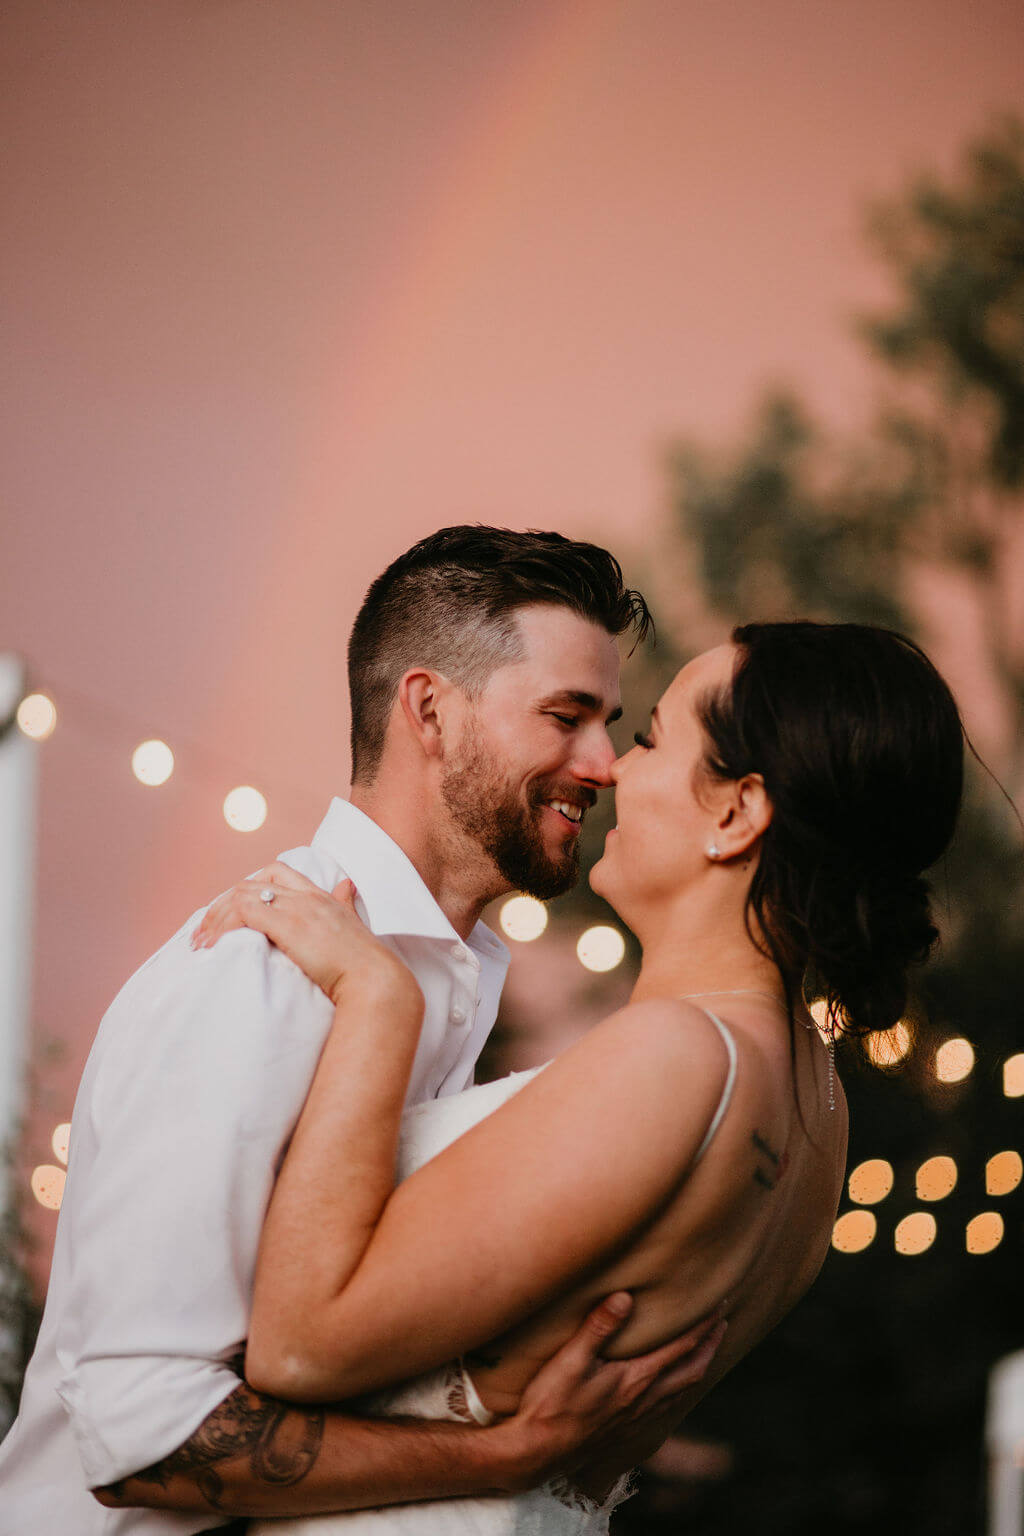 A newly married couple embrace in front of a rainbow at their outdoor wedding.